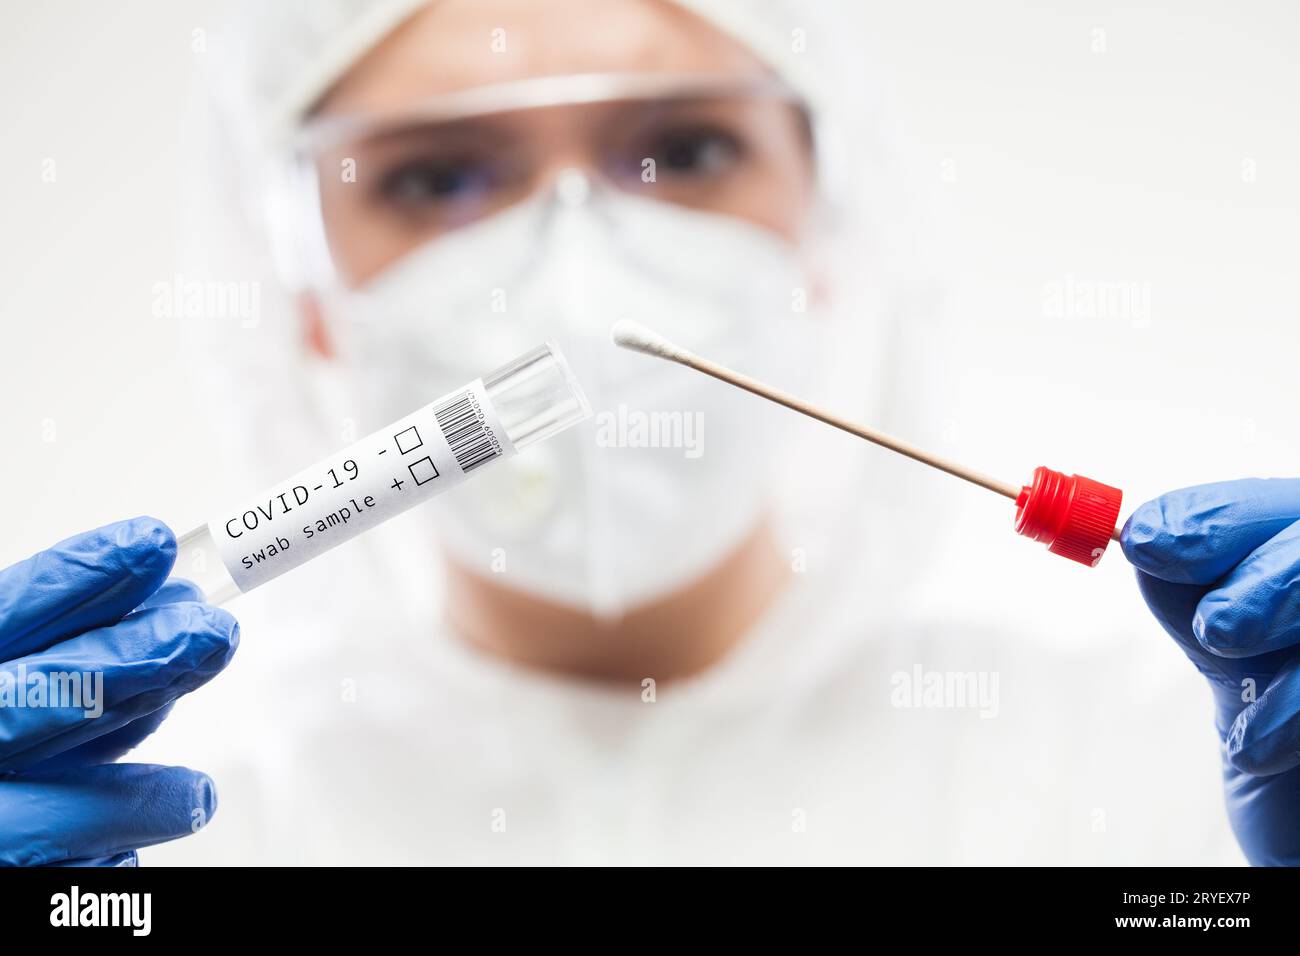 Medical UK healthcare technologist holding COVID-19 swab collection kit Stock Photo